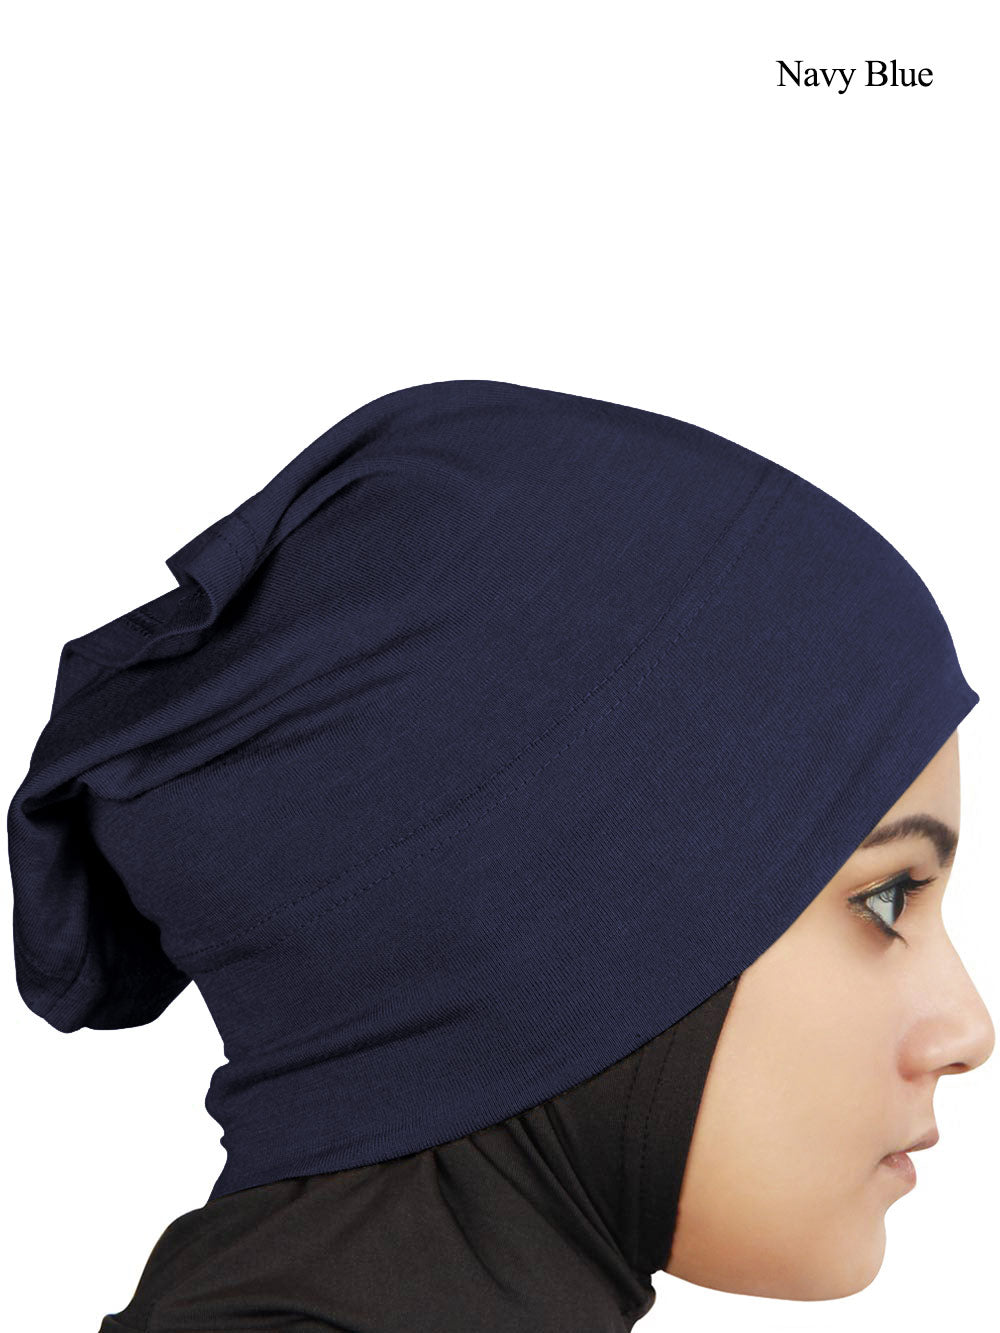 Two Piece Instant Navy Blue Viscose Jersey Hijab